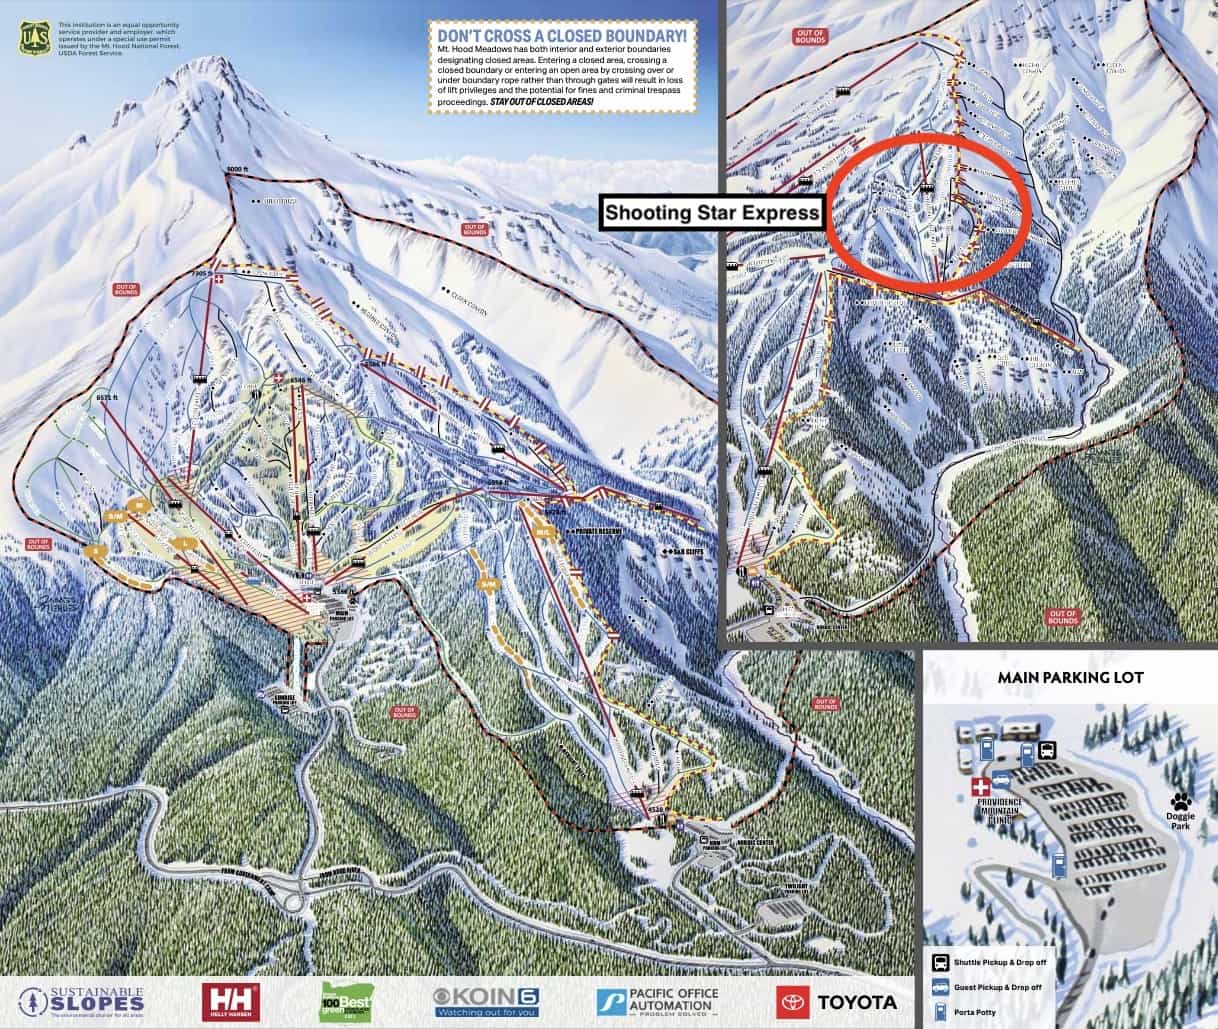 mt hood meadows, shooting star express, missing snowboarder